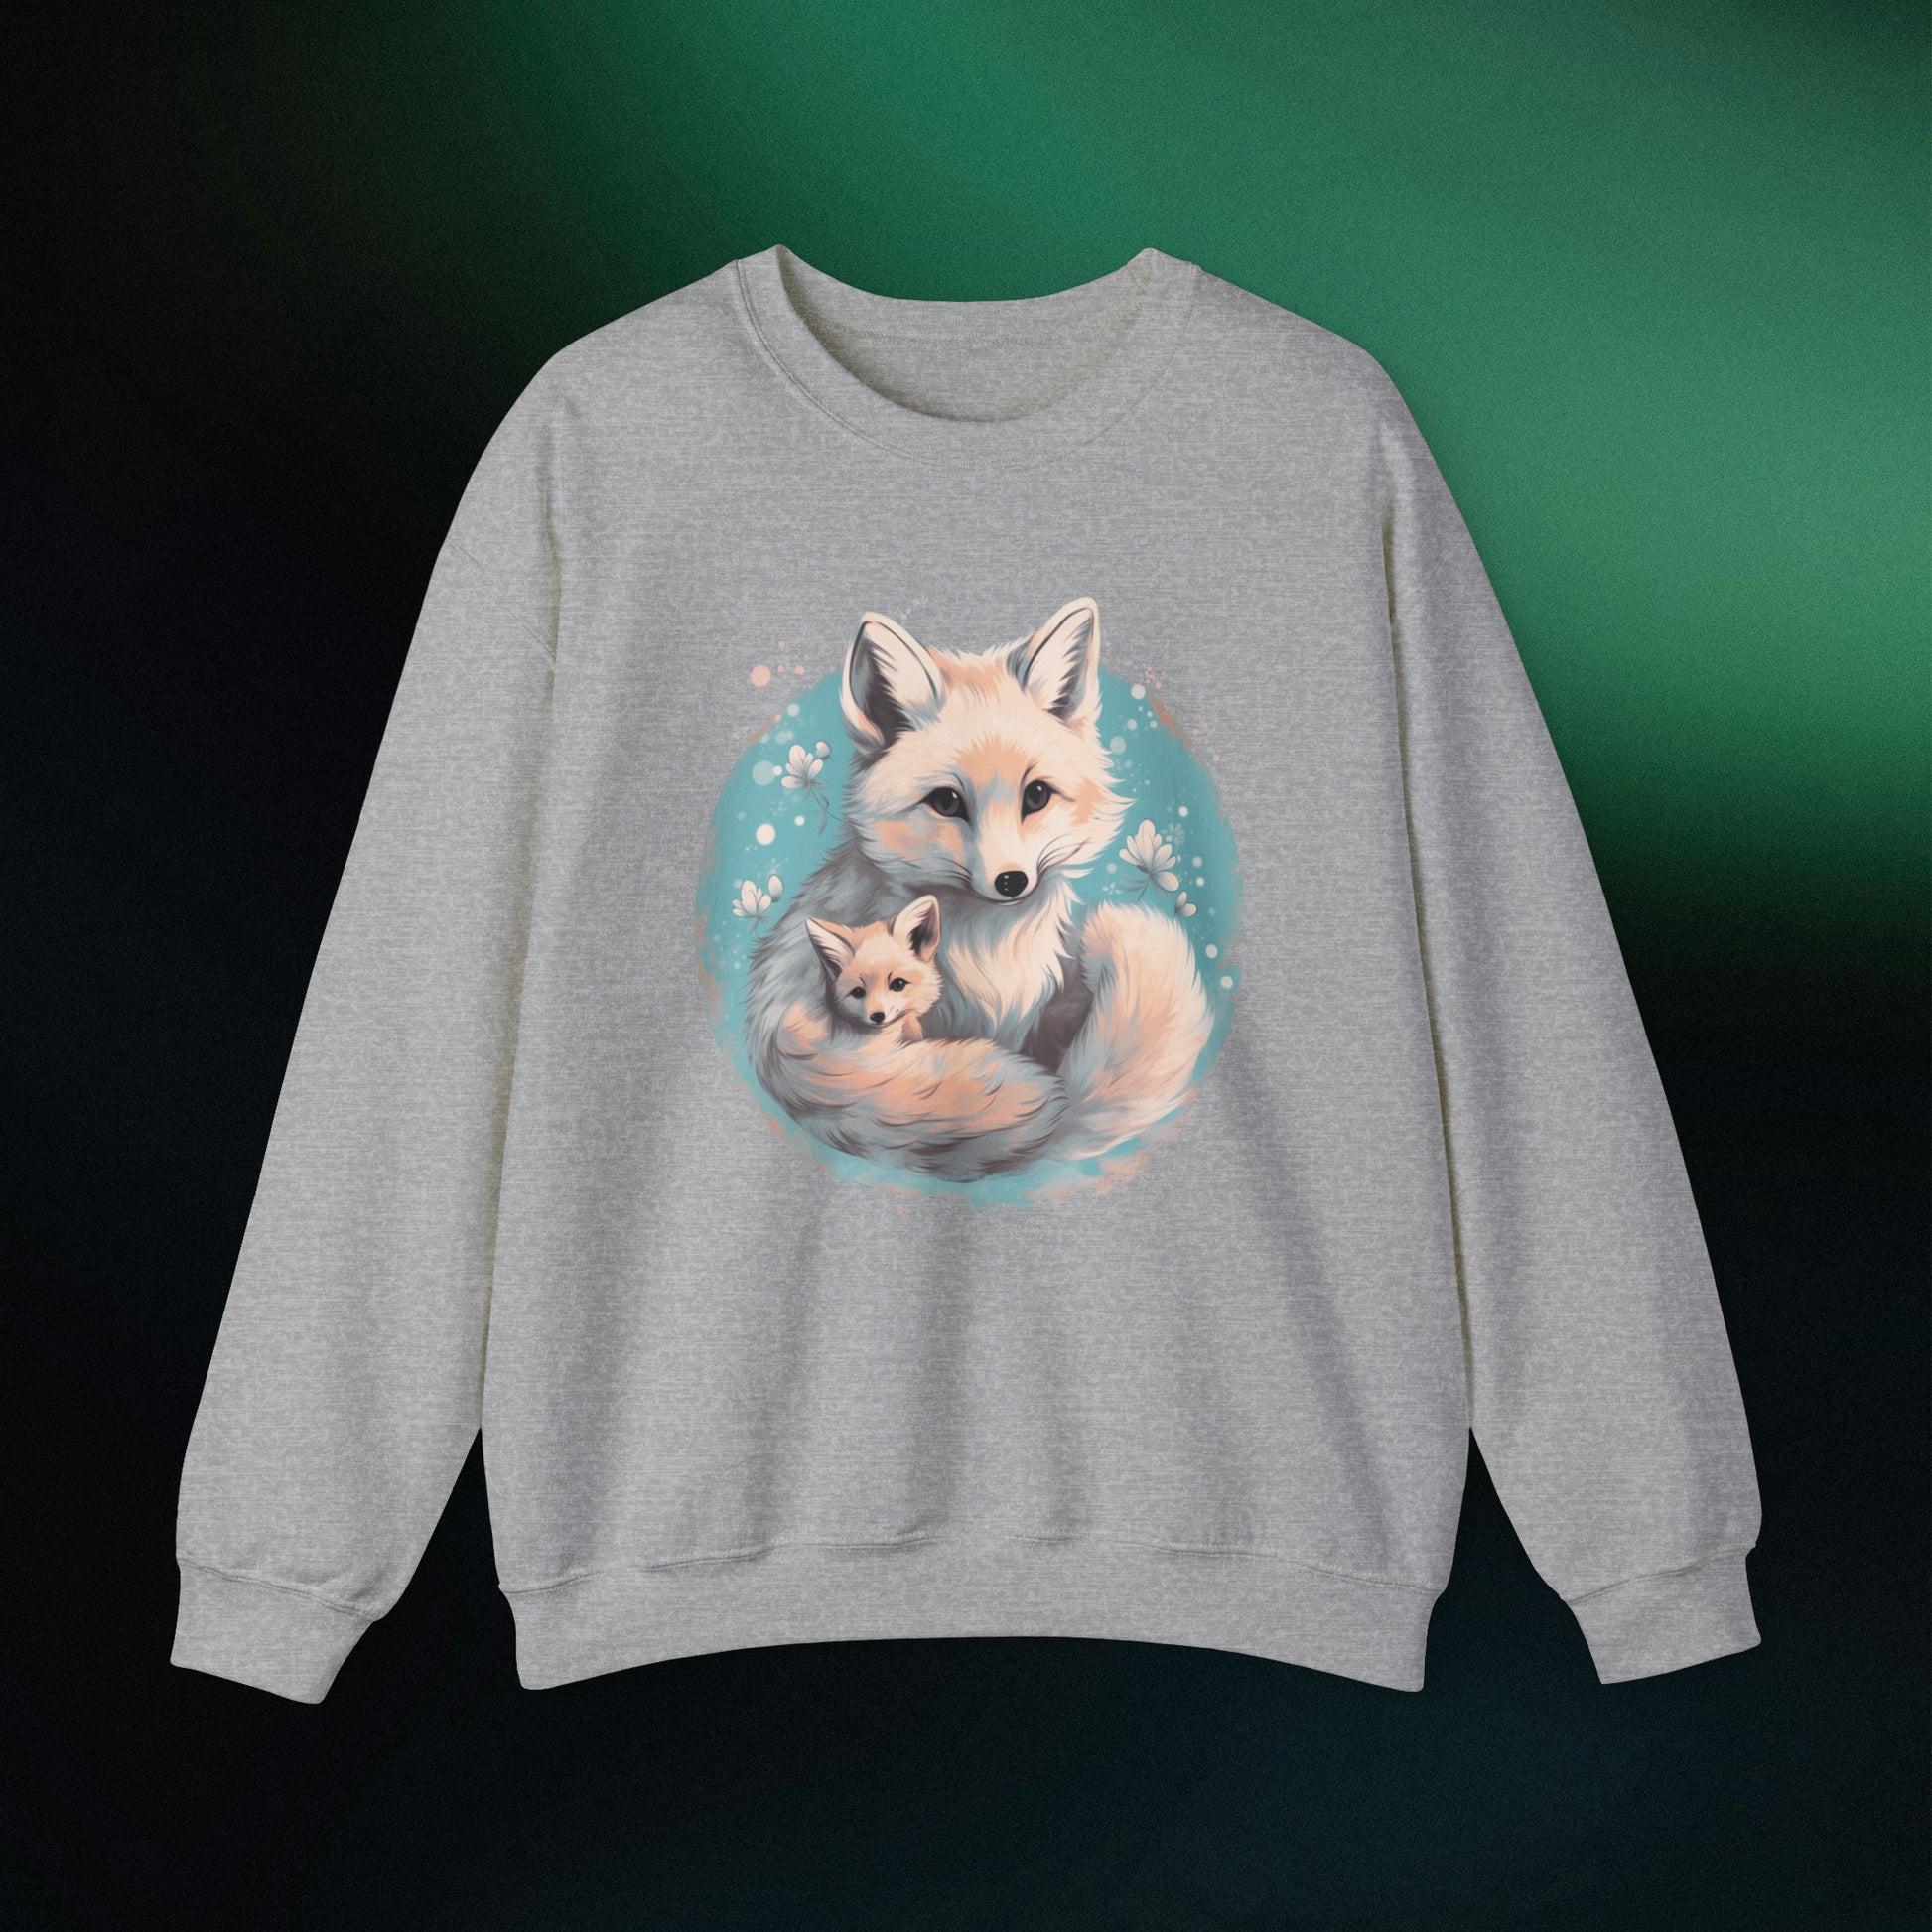 Vintage Forest Witch Aesthetic Sweatshirt - Cozy Fox Cottagecore Sweater with Mommy and Baby Fox Design Sweatshirt S Sport Grey 